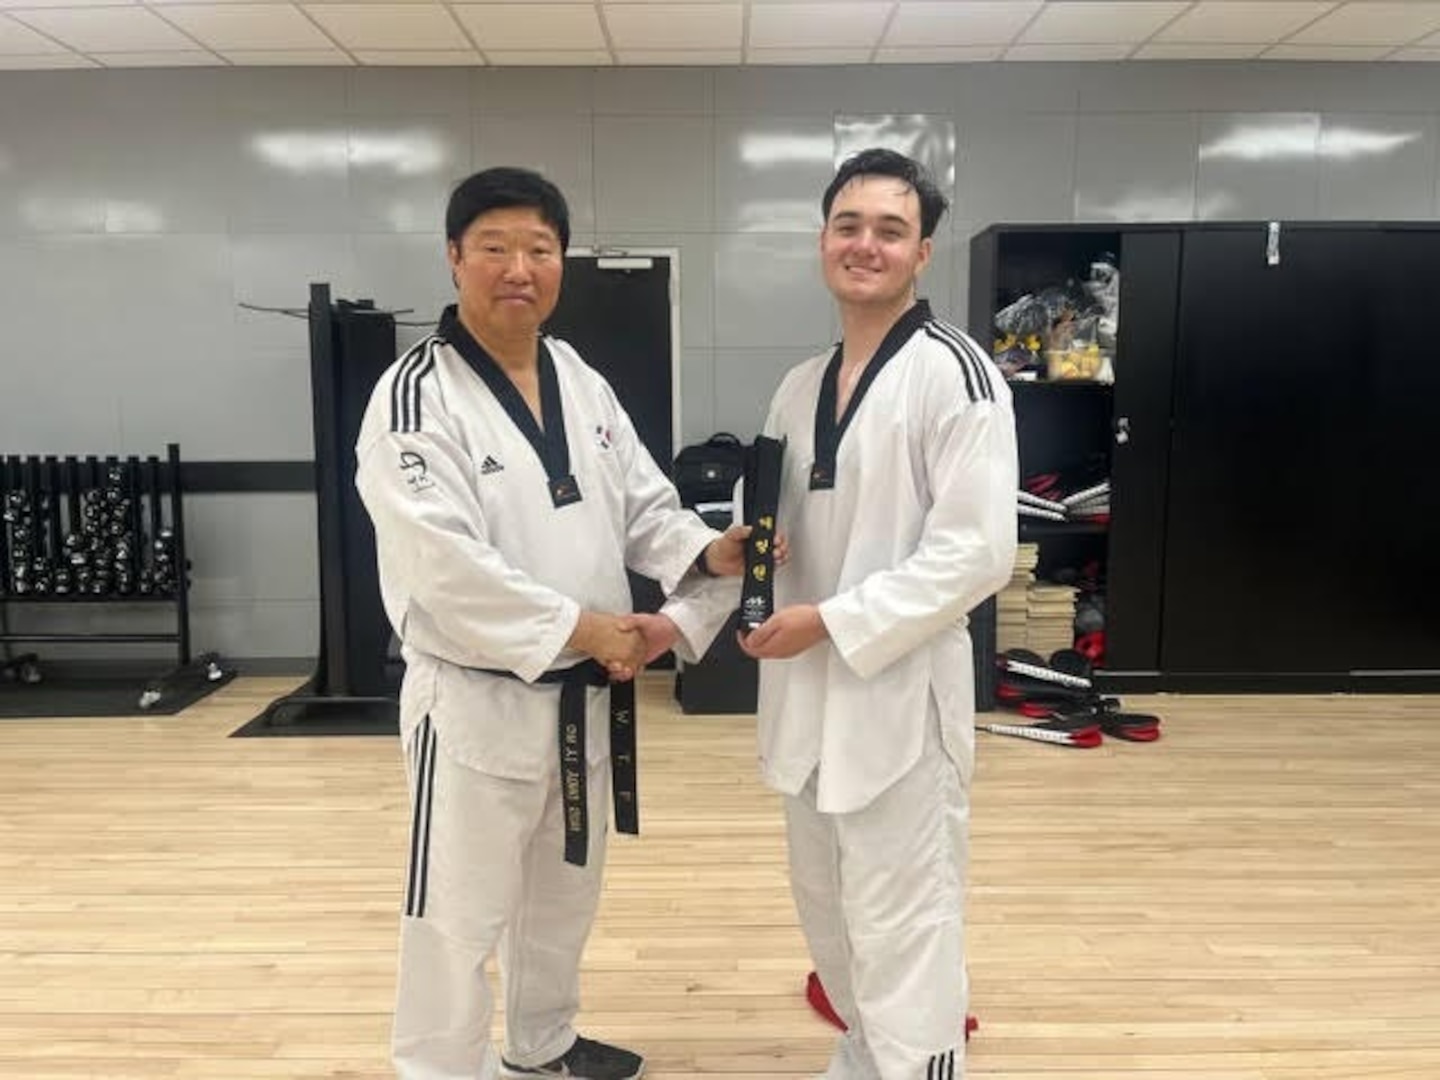 Yi Yong-son (left), a 7th degree Taekwondo black belt, presents a black belt to Sgt. Robert J. Errington (right) from the 59th Chemical, Biological, Radiological, Nuclear (CBRN) Company (Hazards Response). Errington earned his black belt in six months. Courtesy photo.